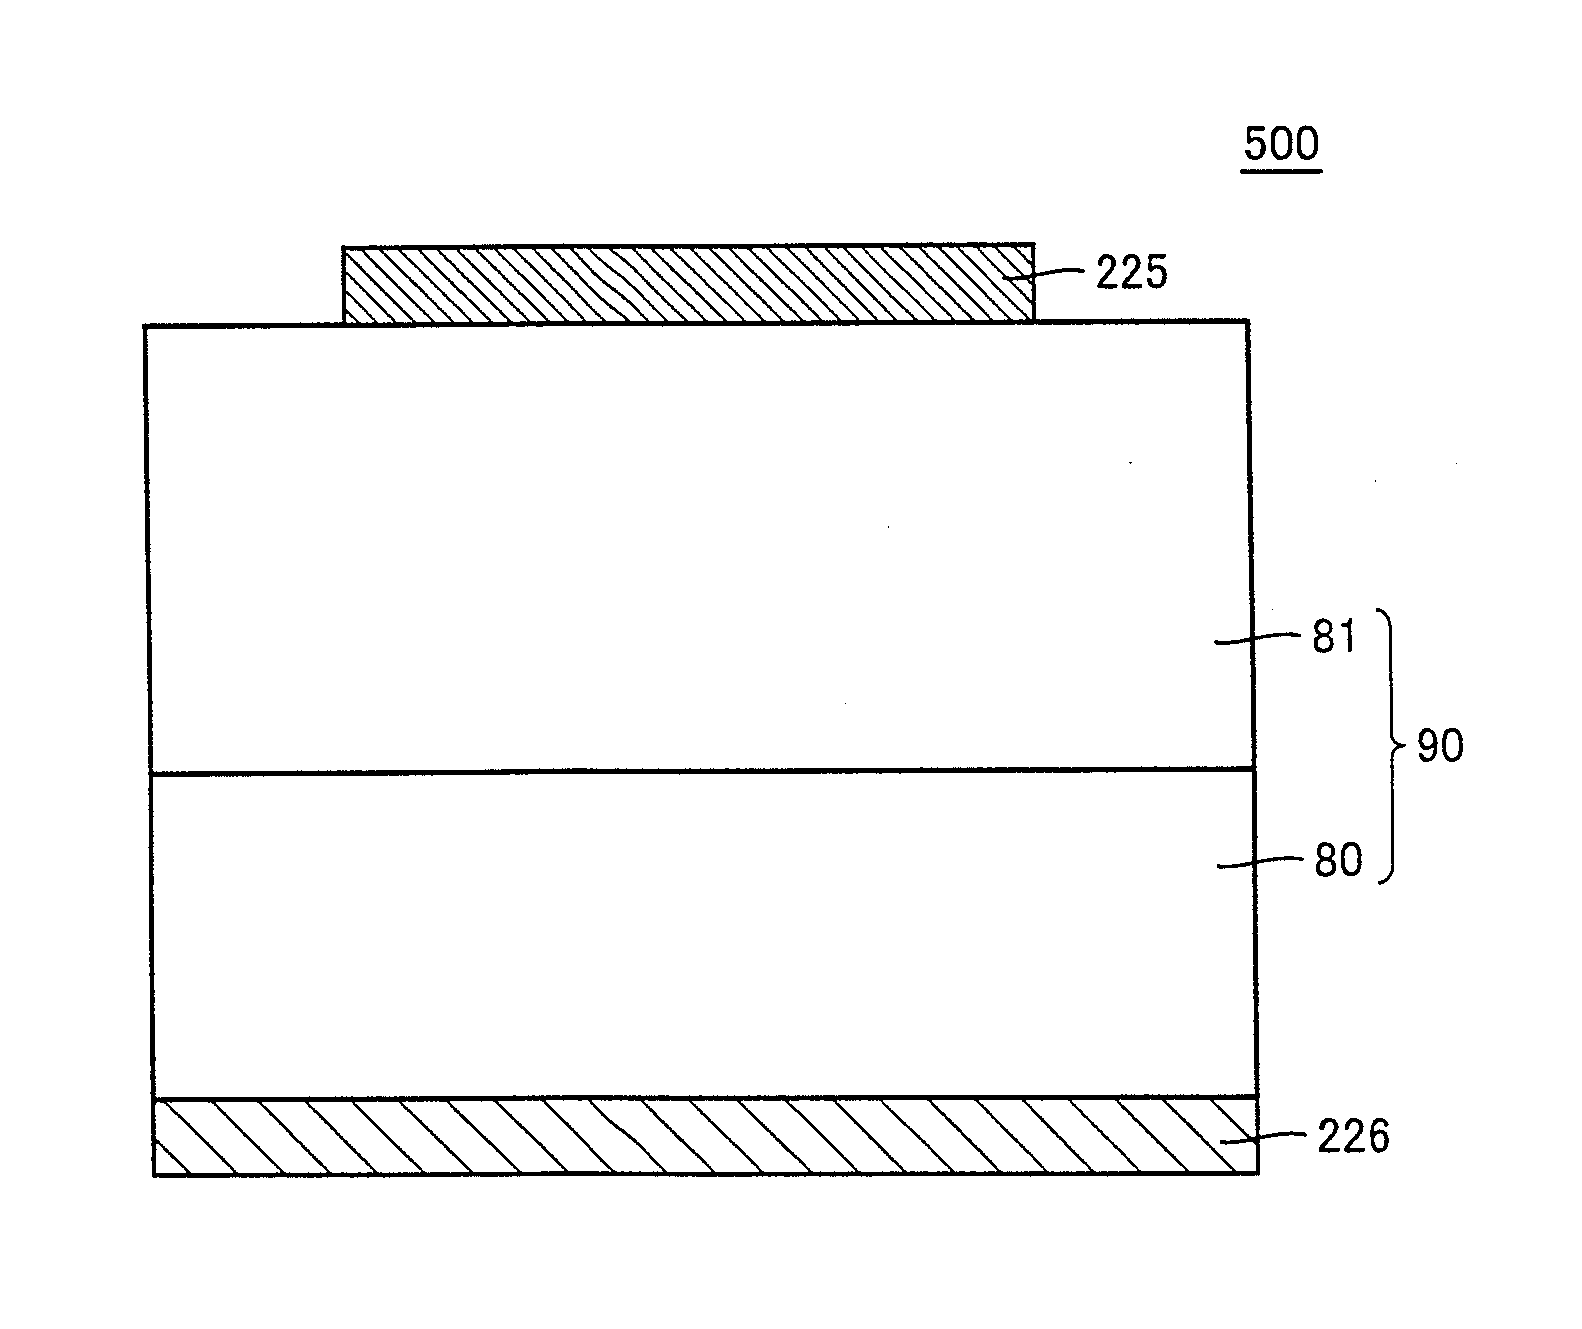 Silicon carbide substrate, semiconductor device, method of manufacturing silicon carbide substrate and method of manufacturing semiconductor device